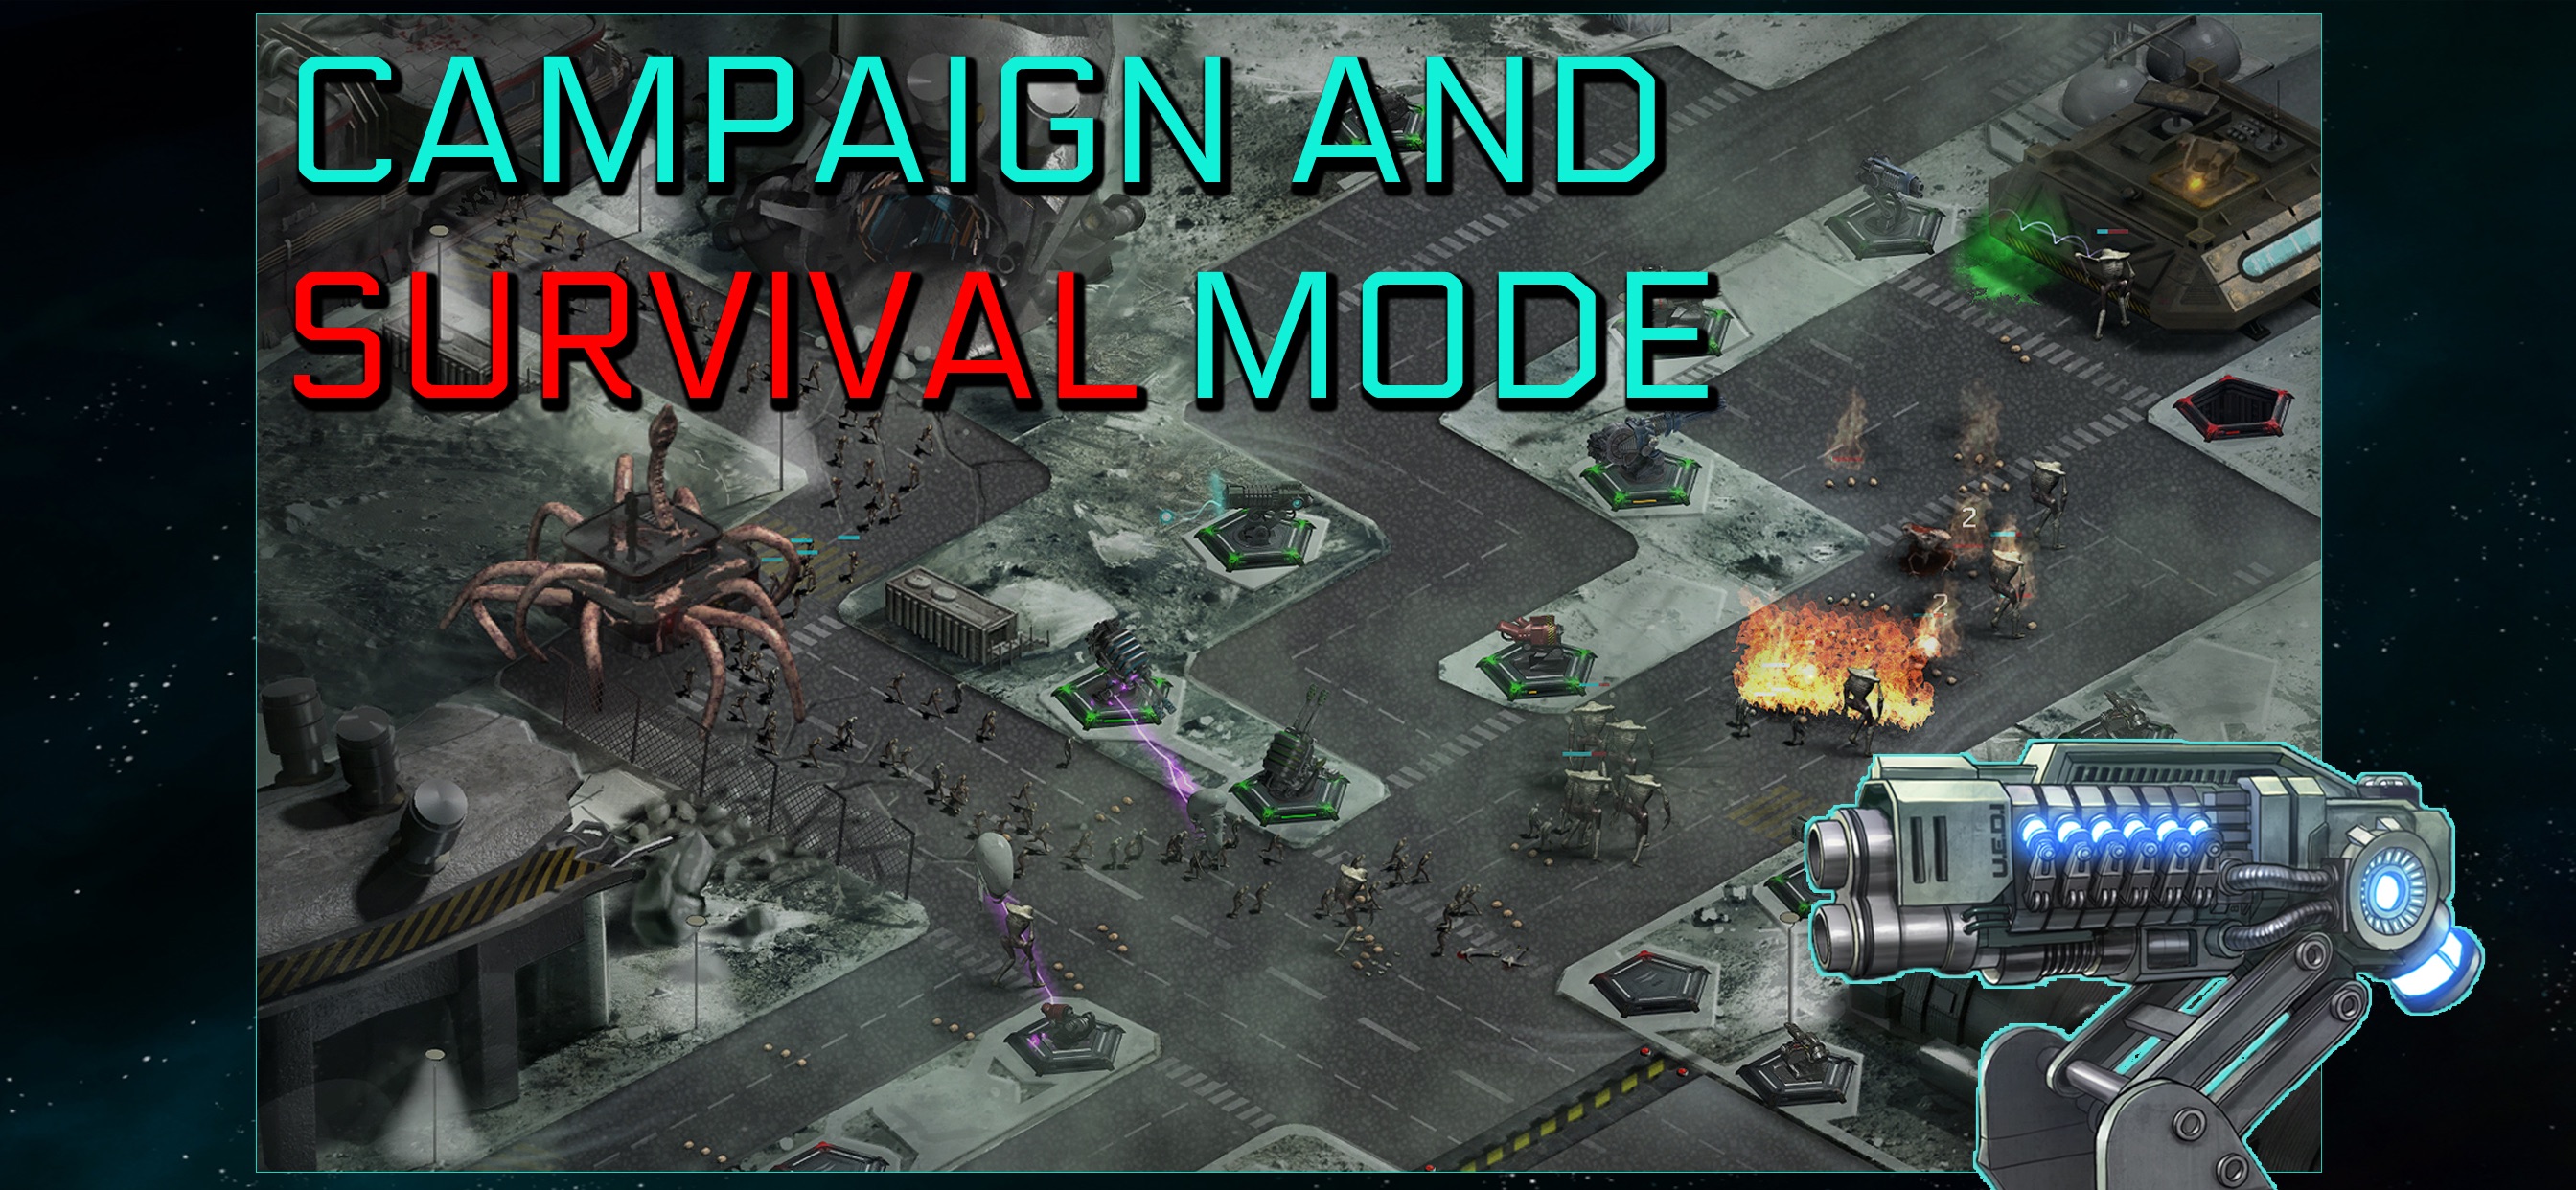 2112td: Tower Defence Survival. 2112td: Tower. STARCRAFT 2 Кристалл ТОВЕР дефенс. Башня Tower Defense флеш. Heroes vs hordes survival